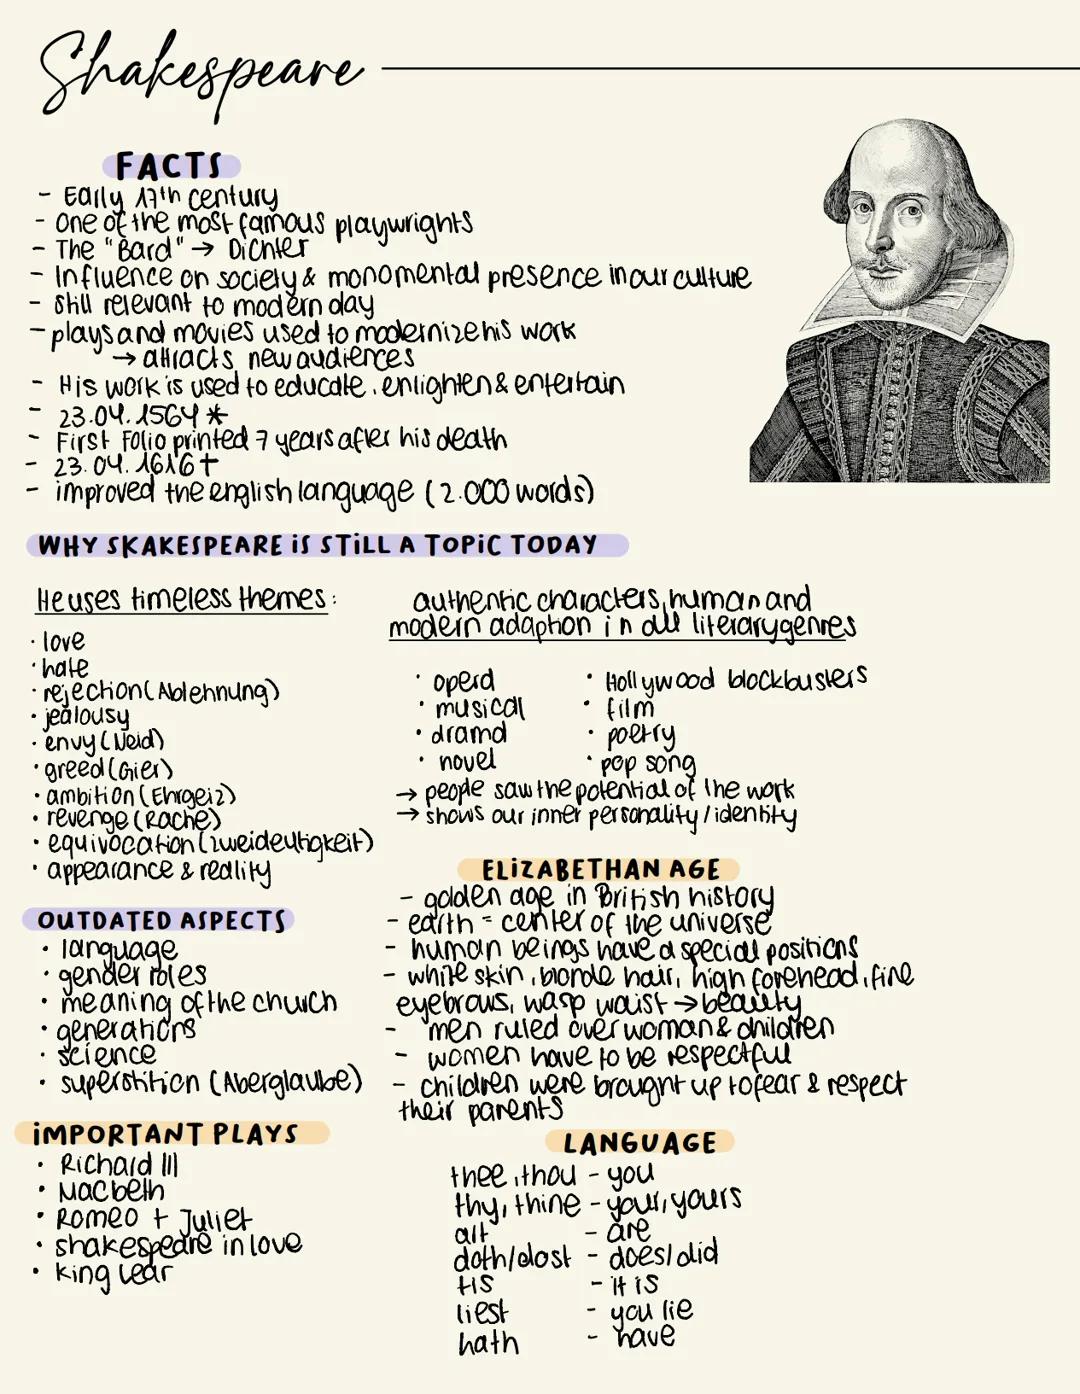 Shakespeare
FACTS
- Early 17th century
one of the most famous playwrights
The "Bard"→ Dichter
- Influence on society & monomental presence i